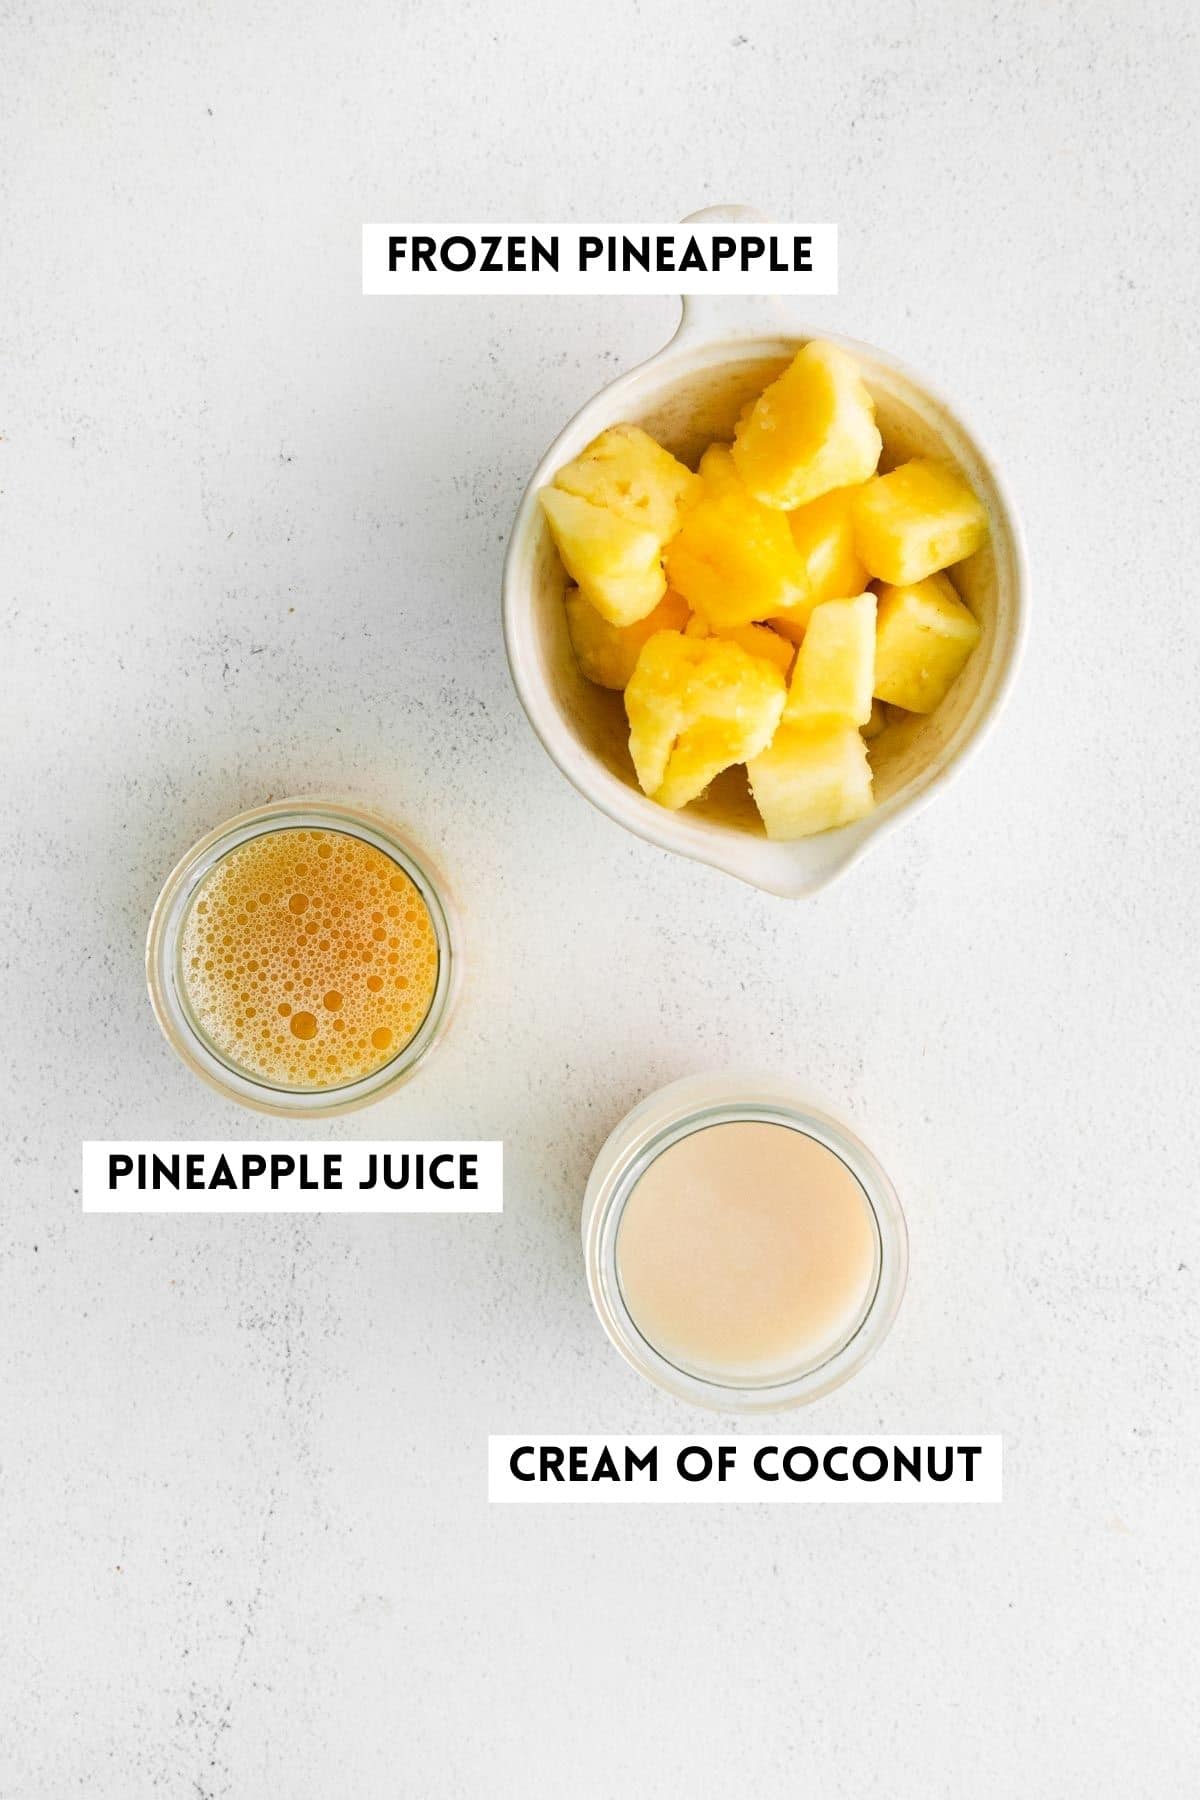 Ingredients for making a virgin pina colada.